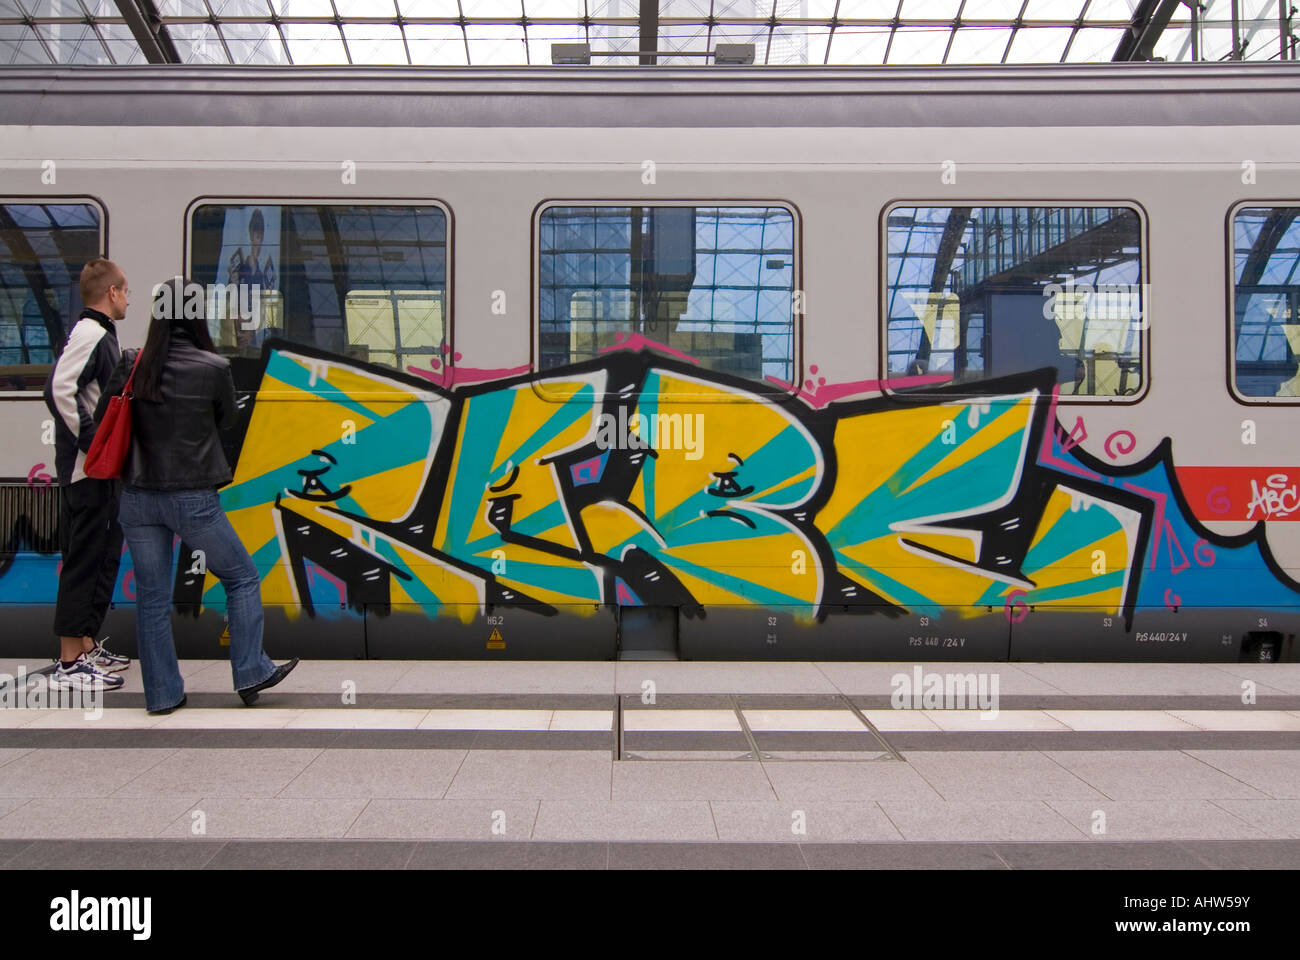 Horizontal close up of an InterCity train carriage covered in graffiti waiting on a platform at Berlin Hauptbahnhof. Stock Photo